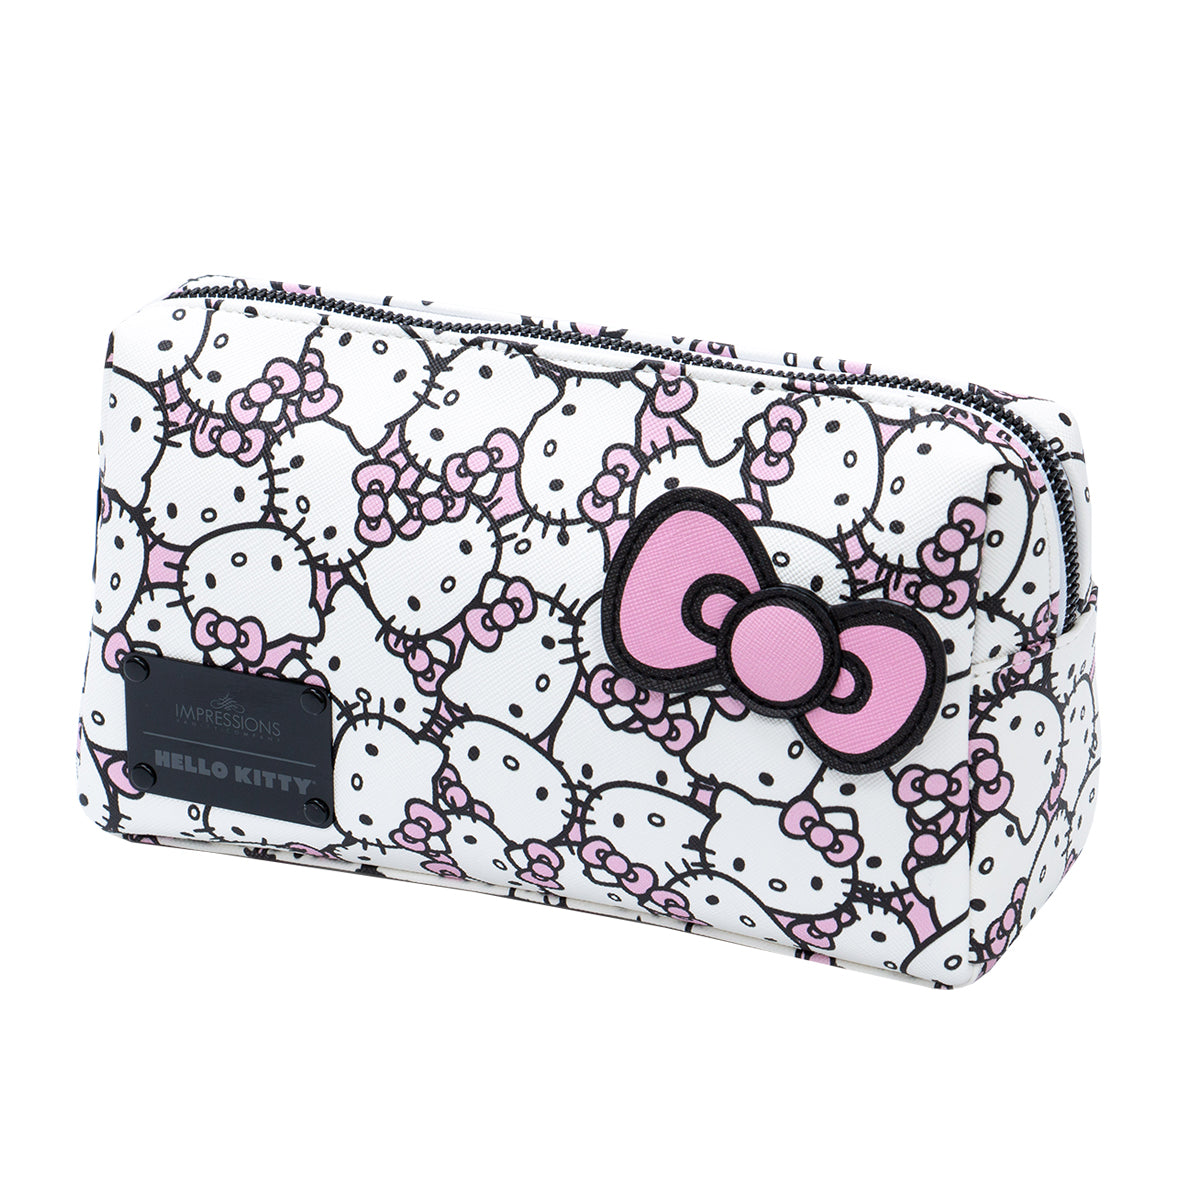 Hello Kitty x Impressions Vanity Cosmetic Pouch (White) Beauty Impressions Vanity   